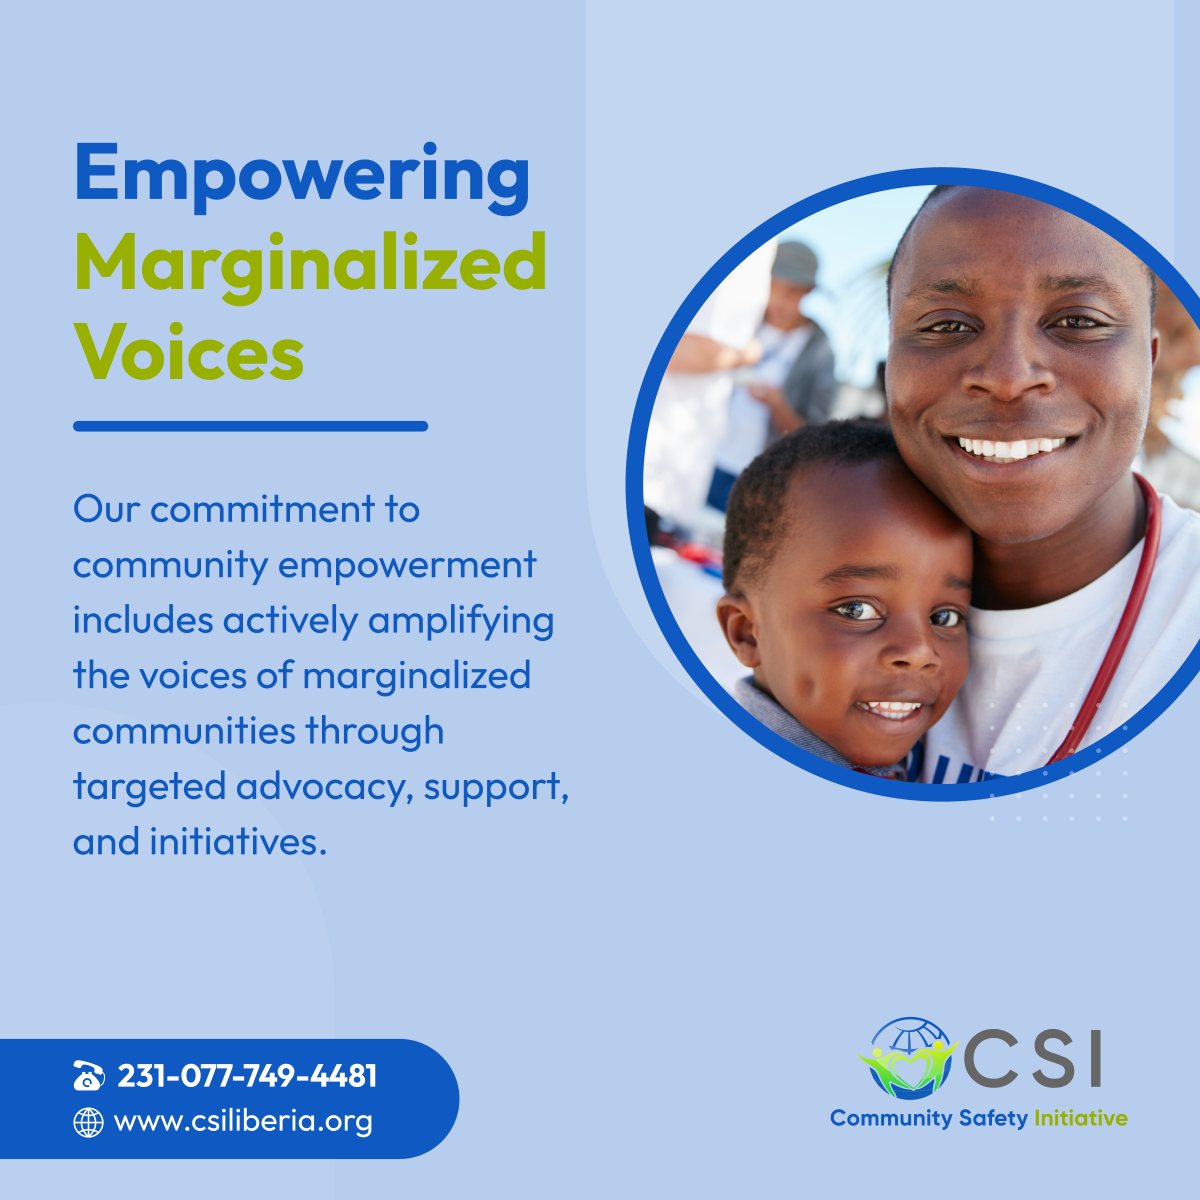 Every voice matters – a chorus of diverse voices strengthens the fabric of community development, and we ensure that everyone's unique story is being heard. 

#EmpowerVoices #PaynesvilleCityMonrovia #NonProfitOrganization